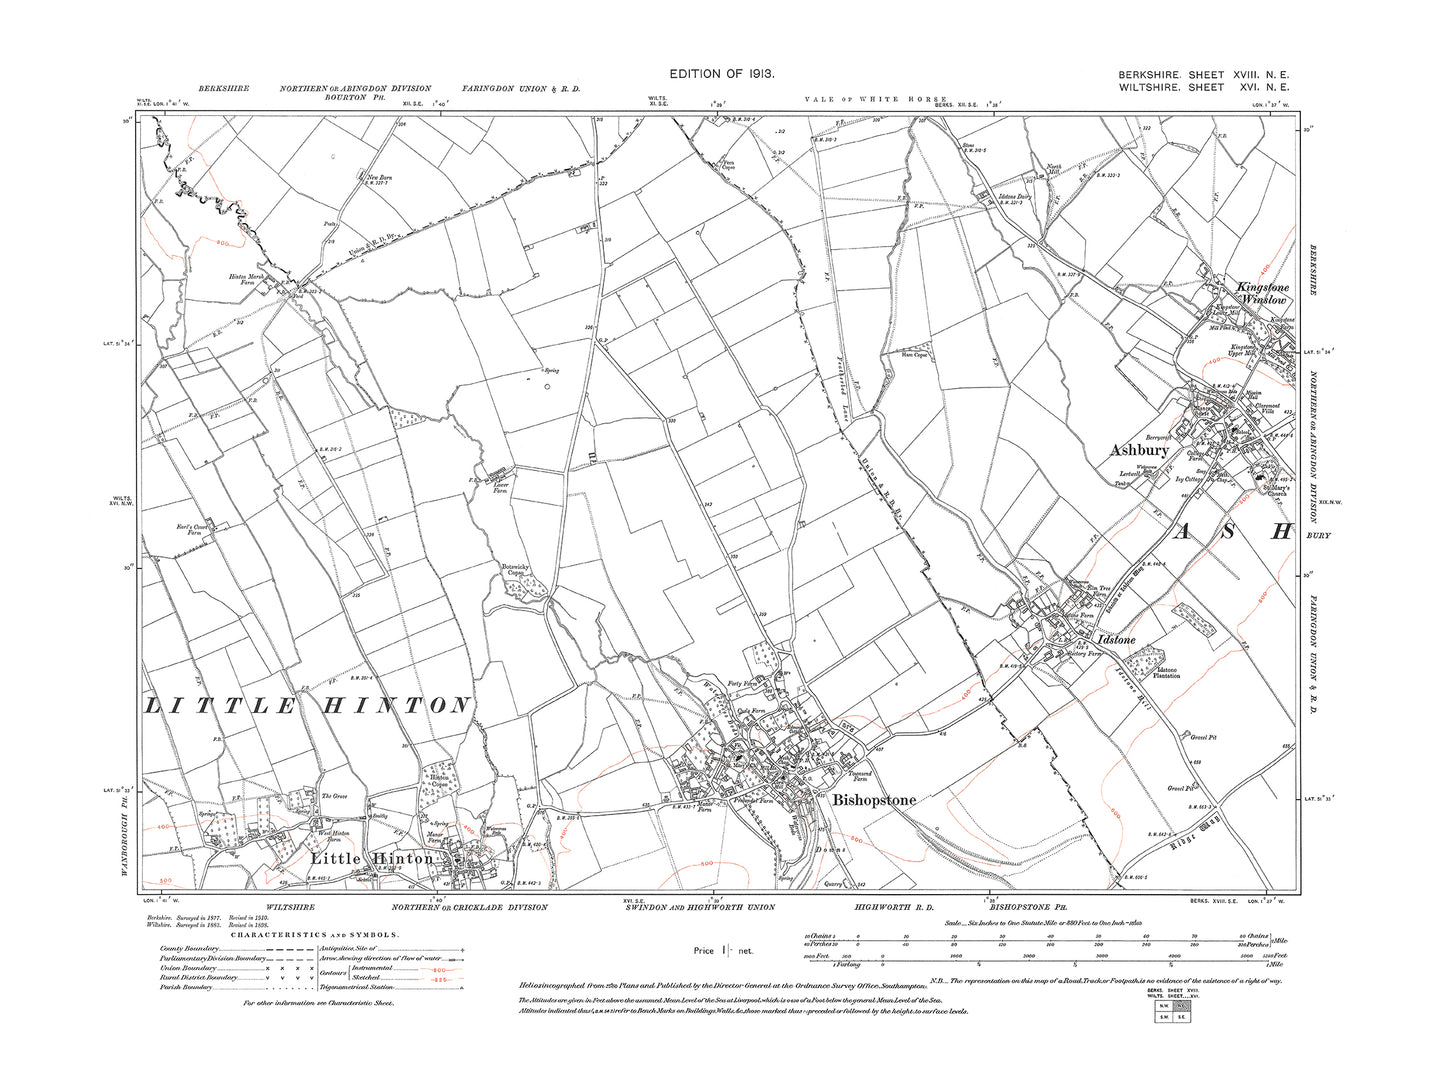 A 1913 map showing Ashbury, Idstone in Berkshire - OS 1:10560 scale map, Berks 18NE